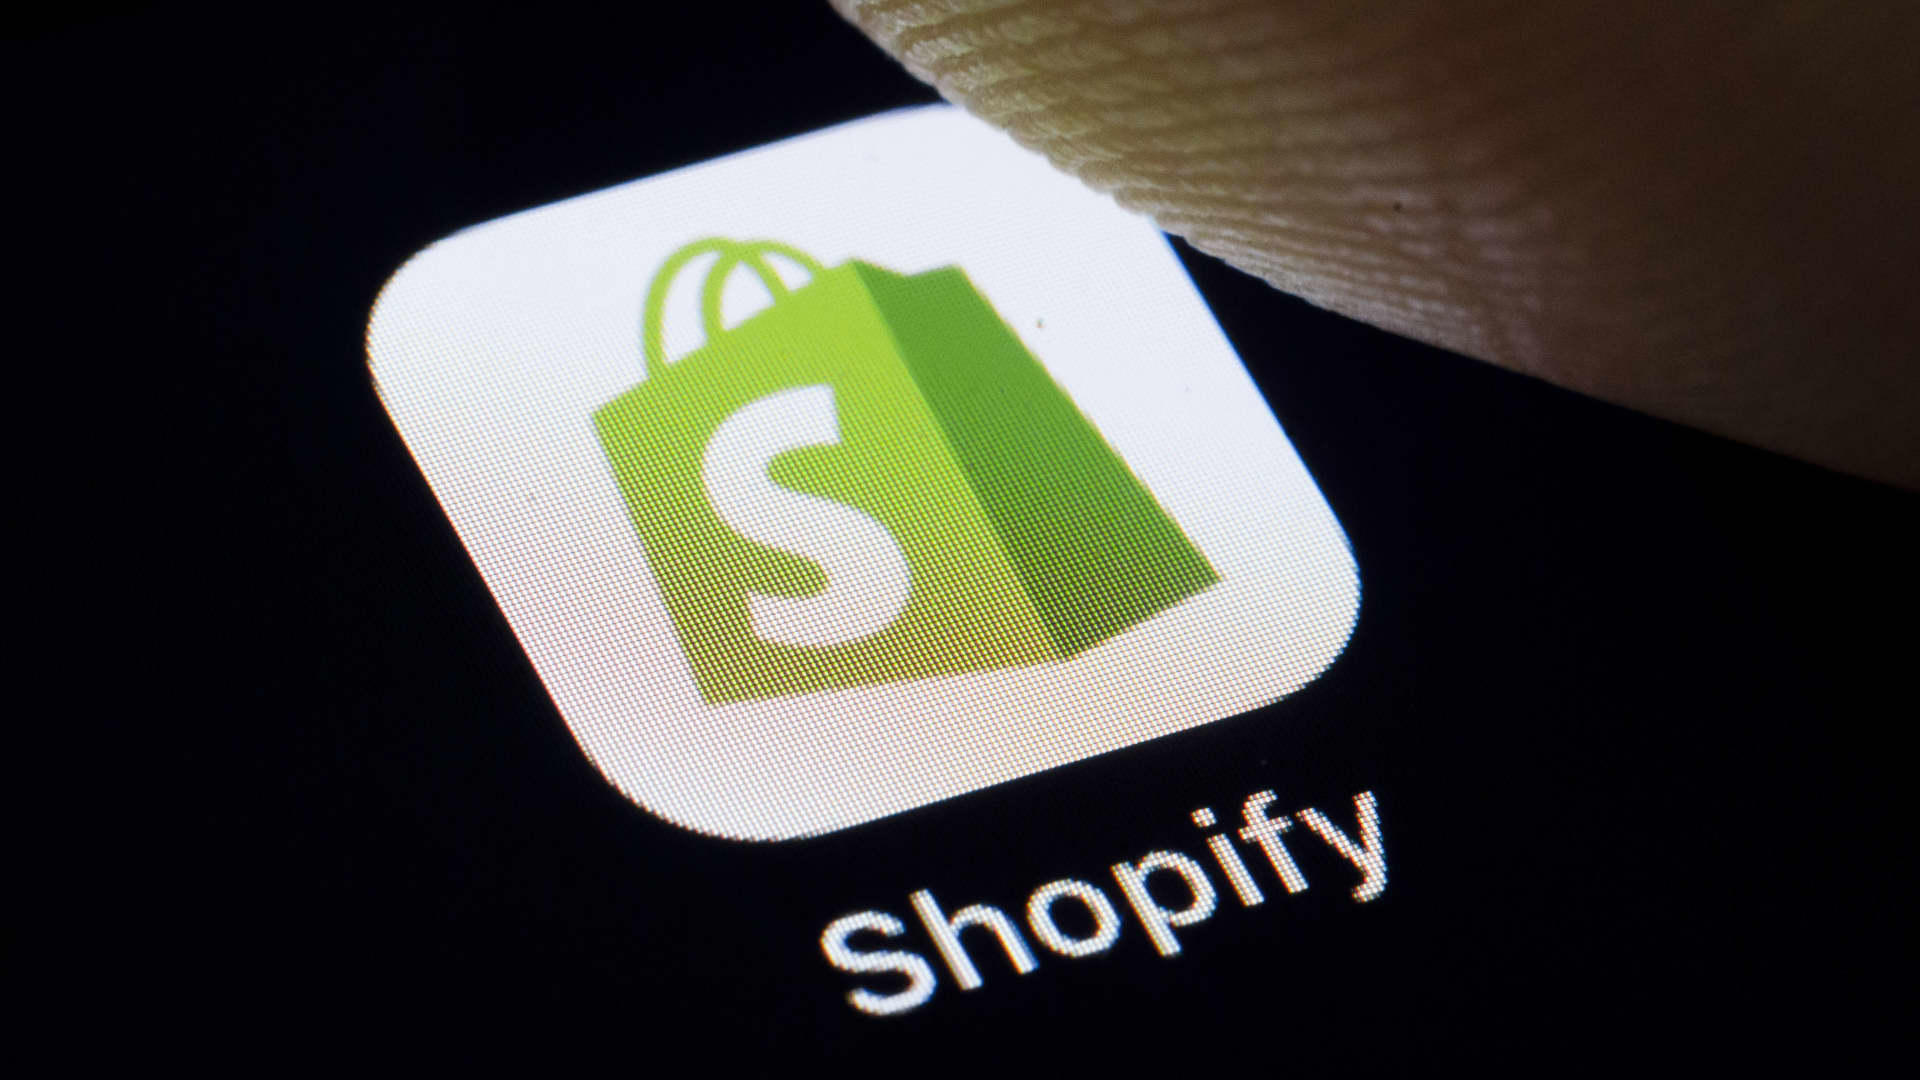 Shopify misses estimates and issues gloomy guidance - CNBC